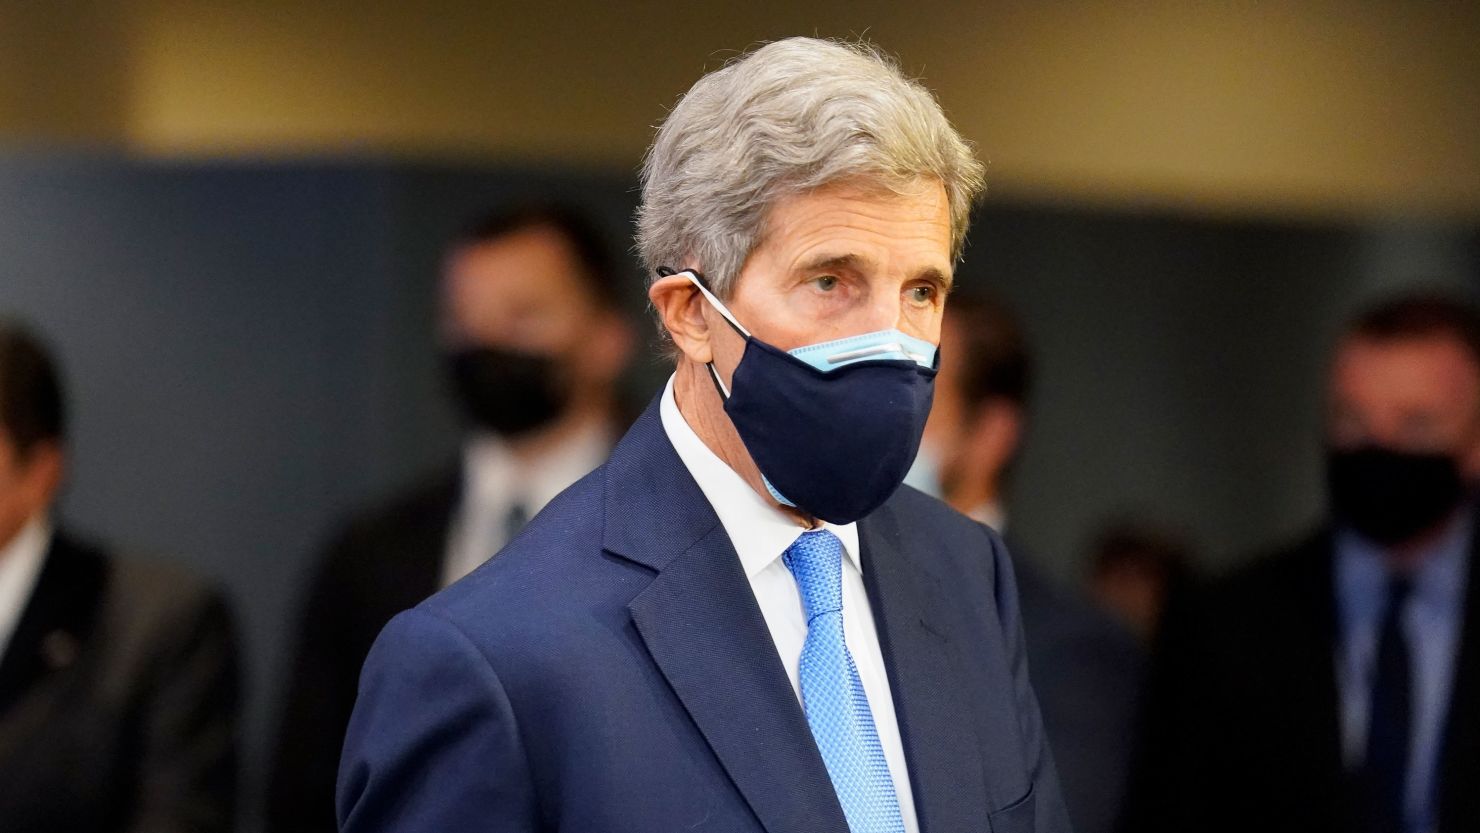 John Kerry at the UN General Assembly in New York on September 21.